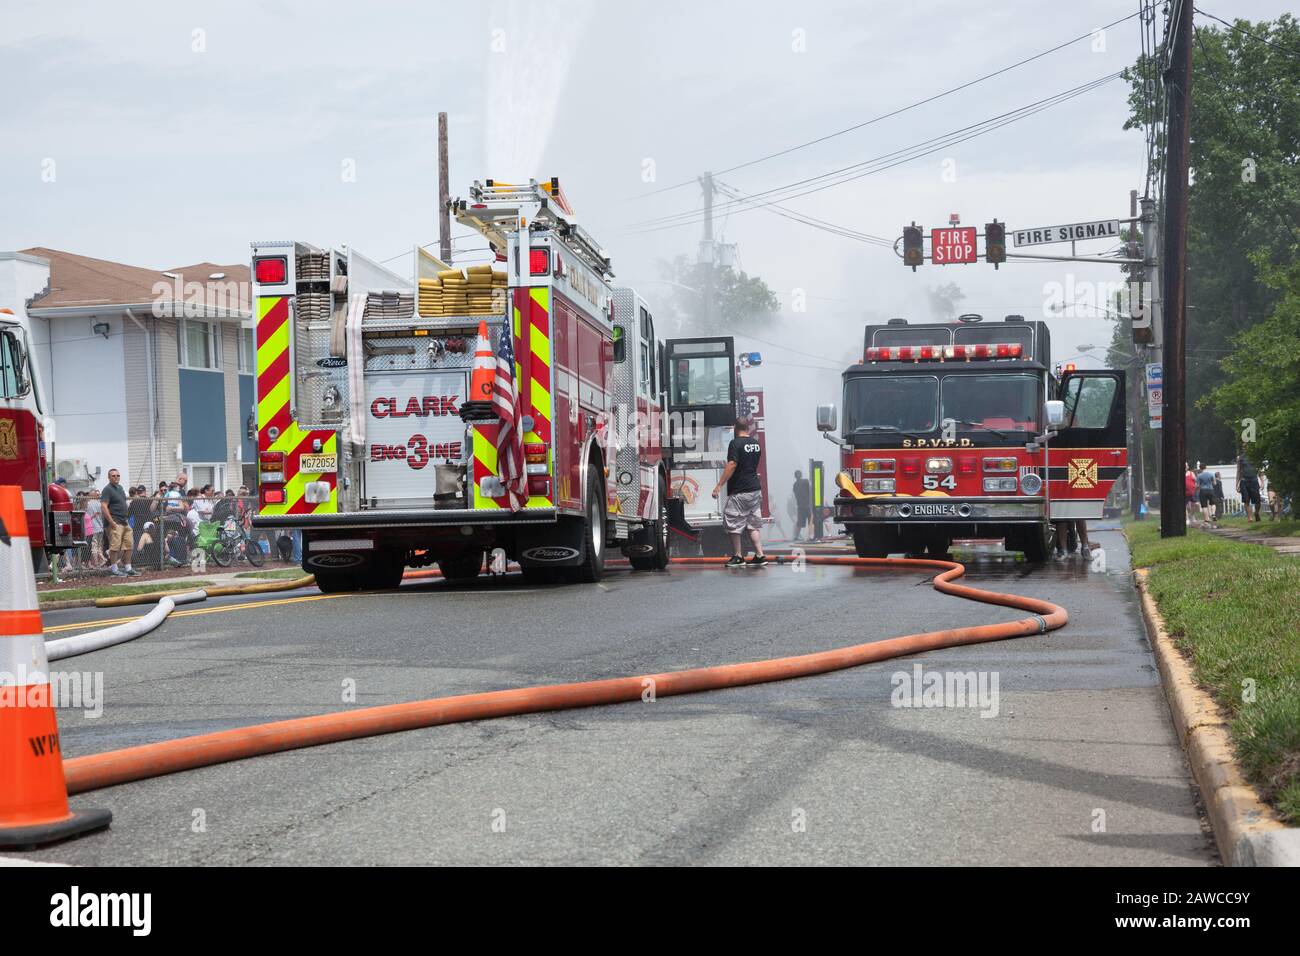 COLONIA, NEW JERSEY / UNITED STATES - June 6, 2015: Fire trucks from various towns participating in the2015 Colonia Fire Department wet down. Stock Photo